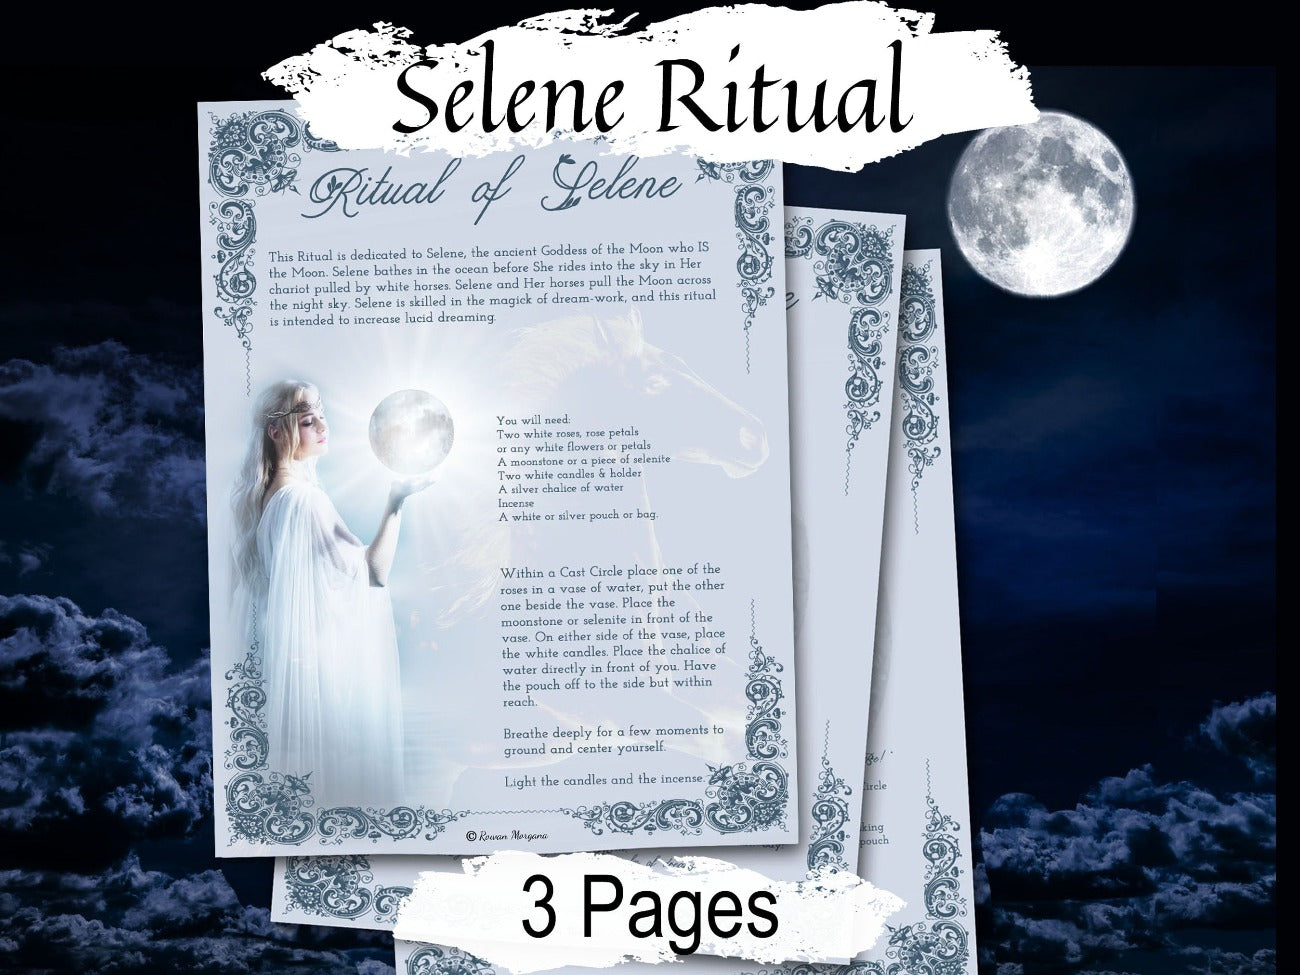 SELENE RITUAL 3 Pages, Witchcraft Moon Goddess Magic Spell, Dream Magic, Lucid Dreaming Spell, Wicca Witch Full Moon Pray Dream Spell - Morgana Magick Spell